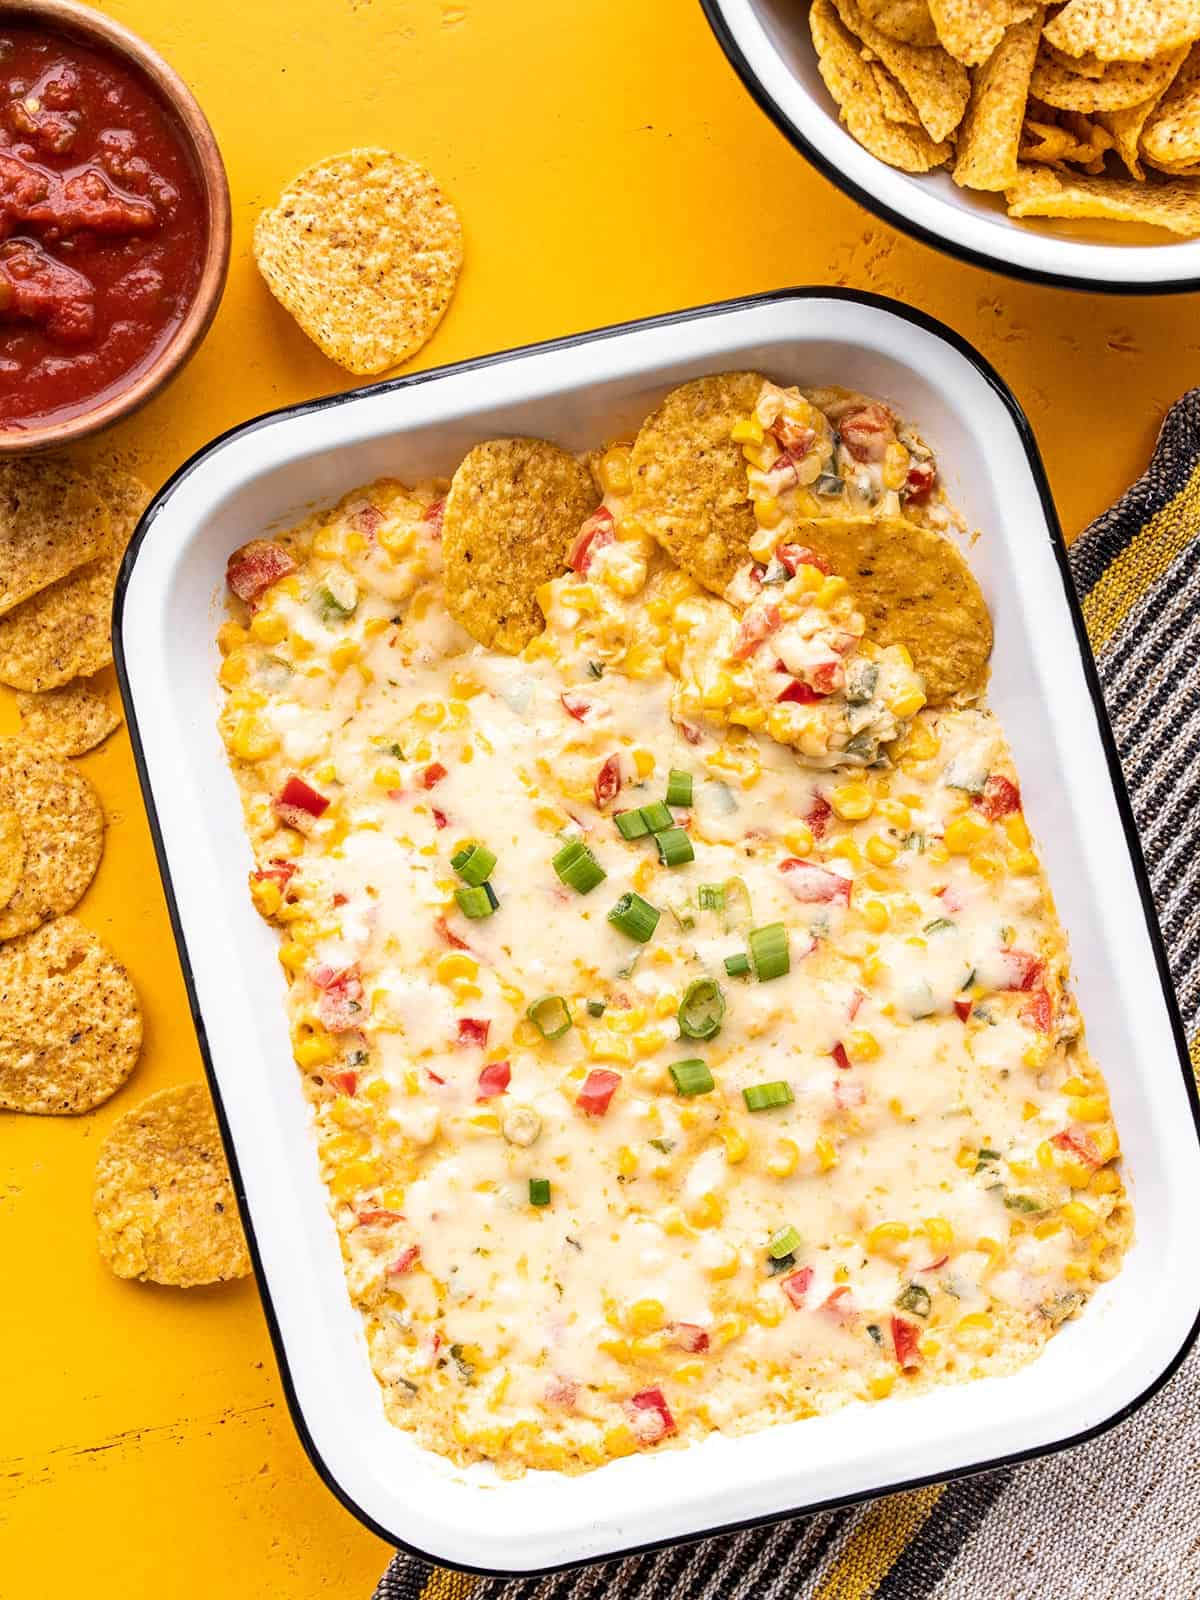 A rectangular baking dish full of hot corn dip with chips and salsa on the sides